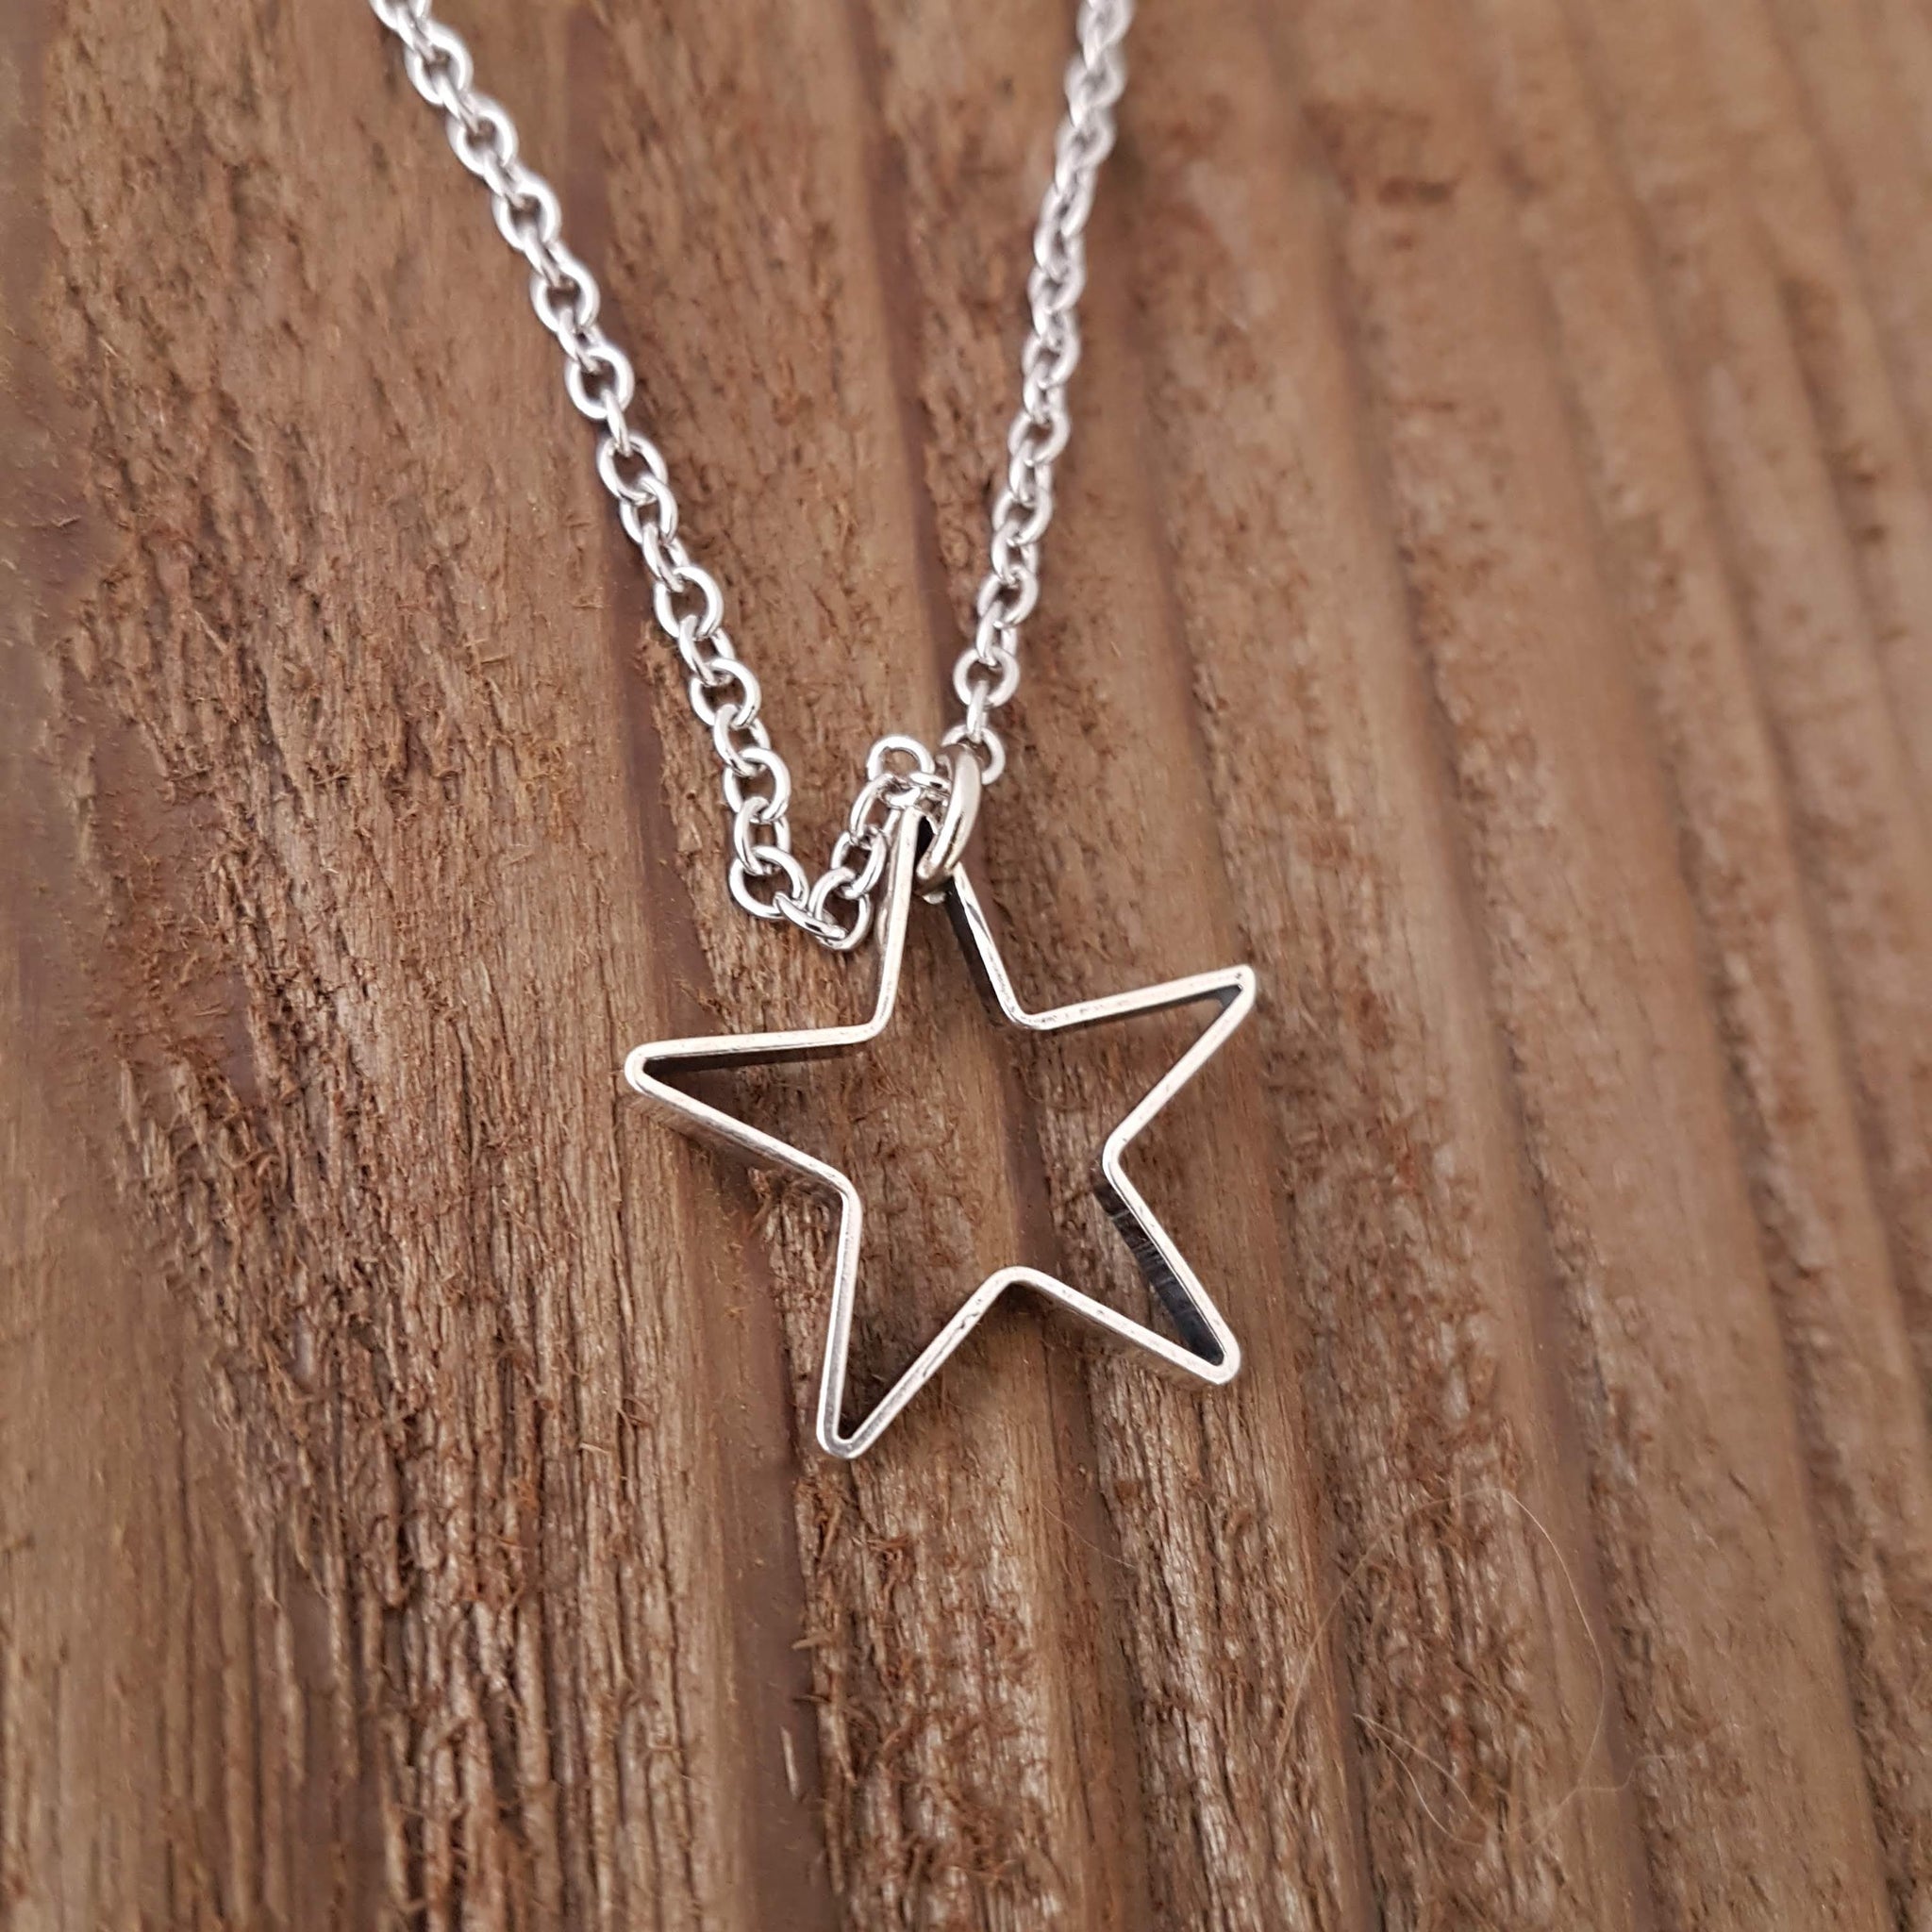 Star Necklace - Gwen Delicious Jewelry Designs